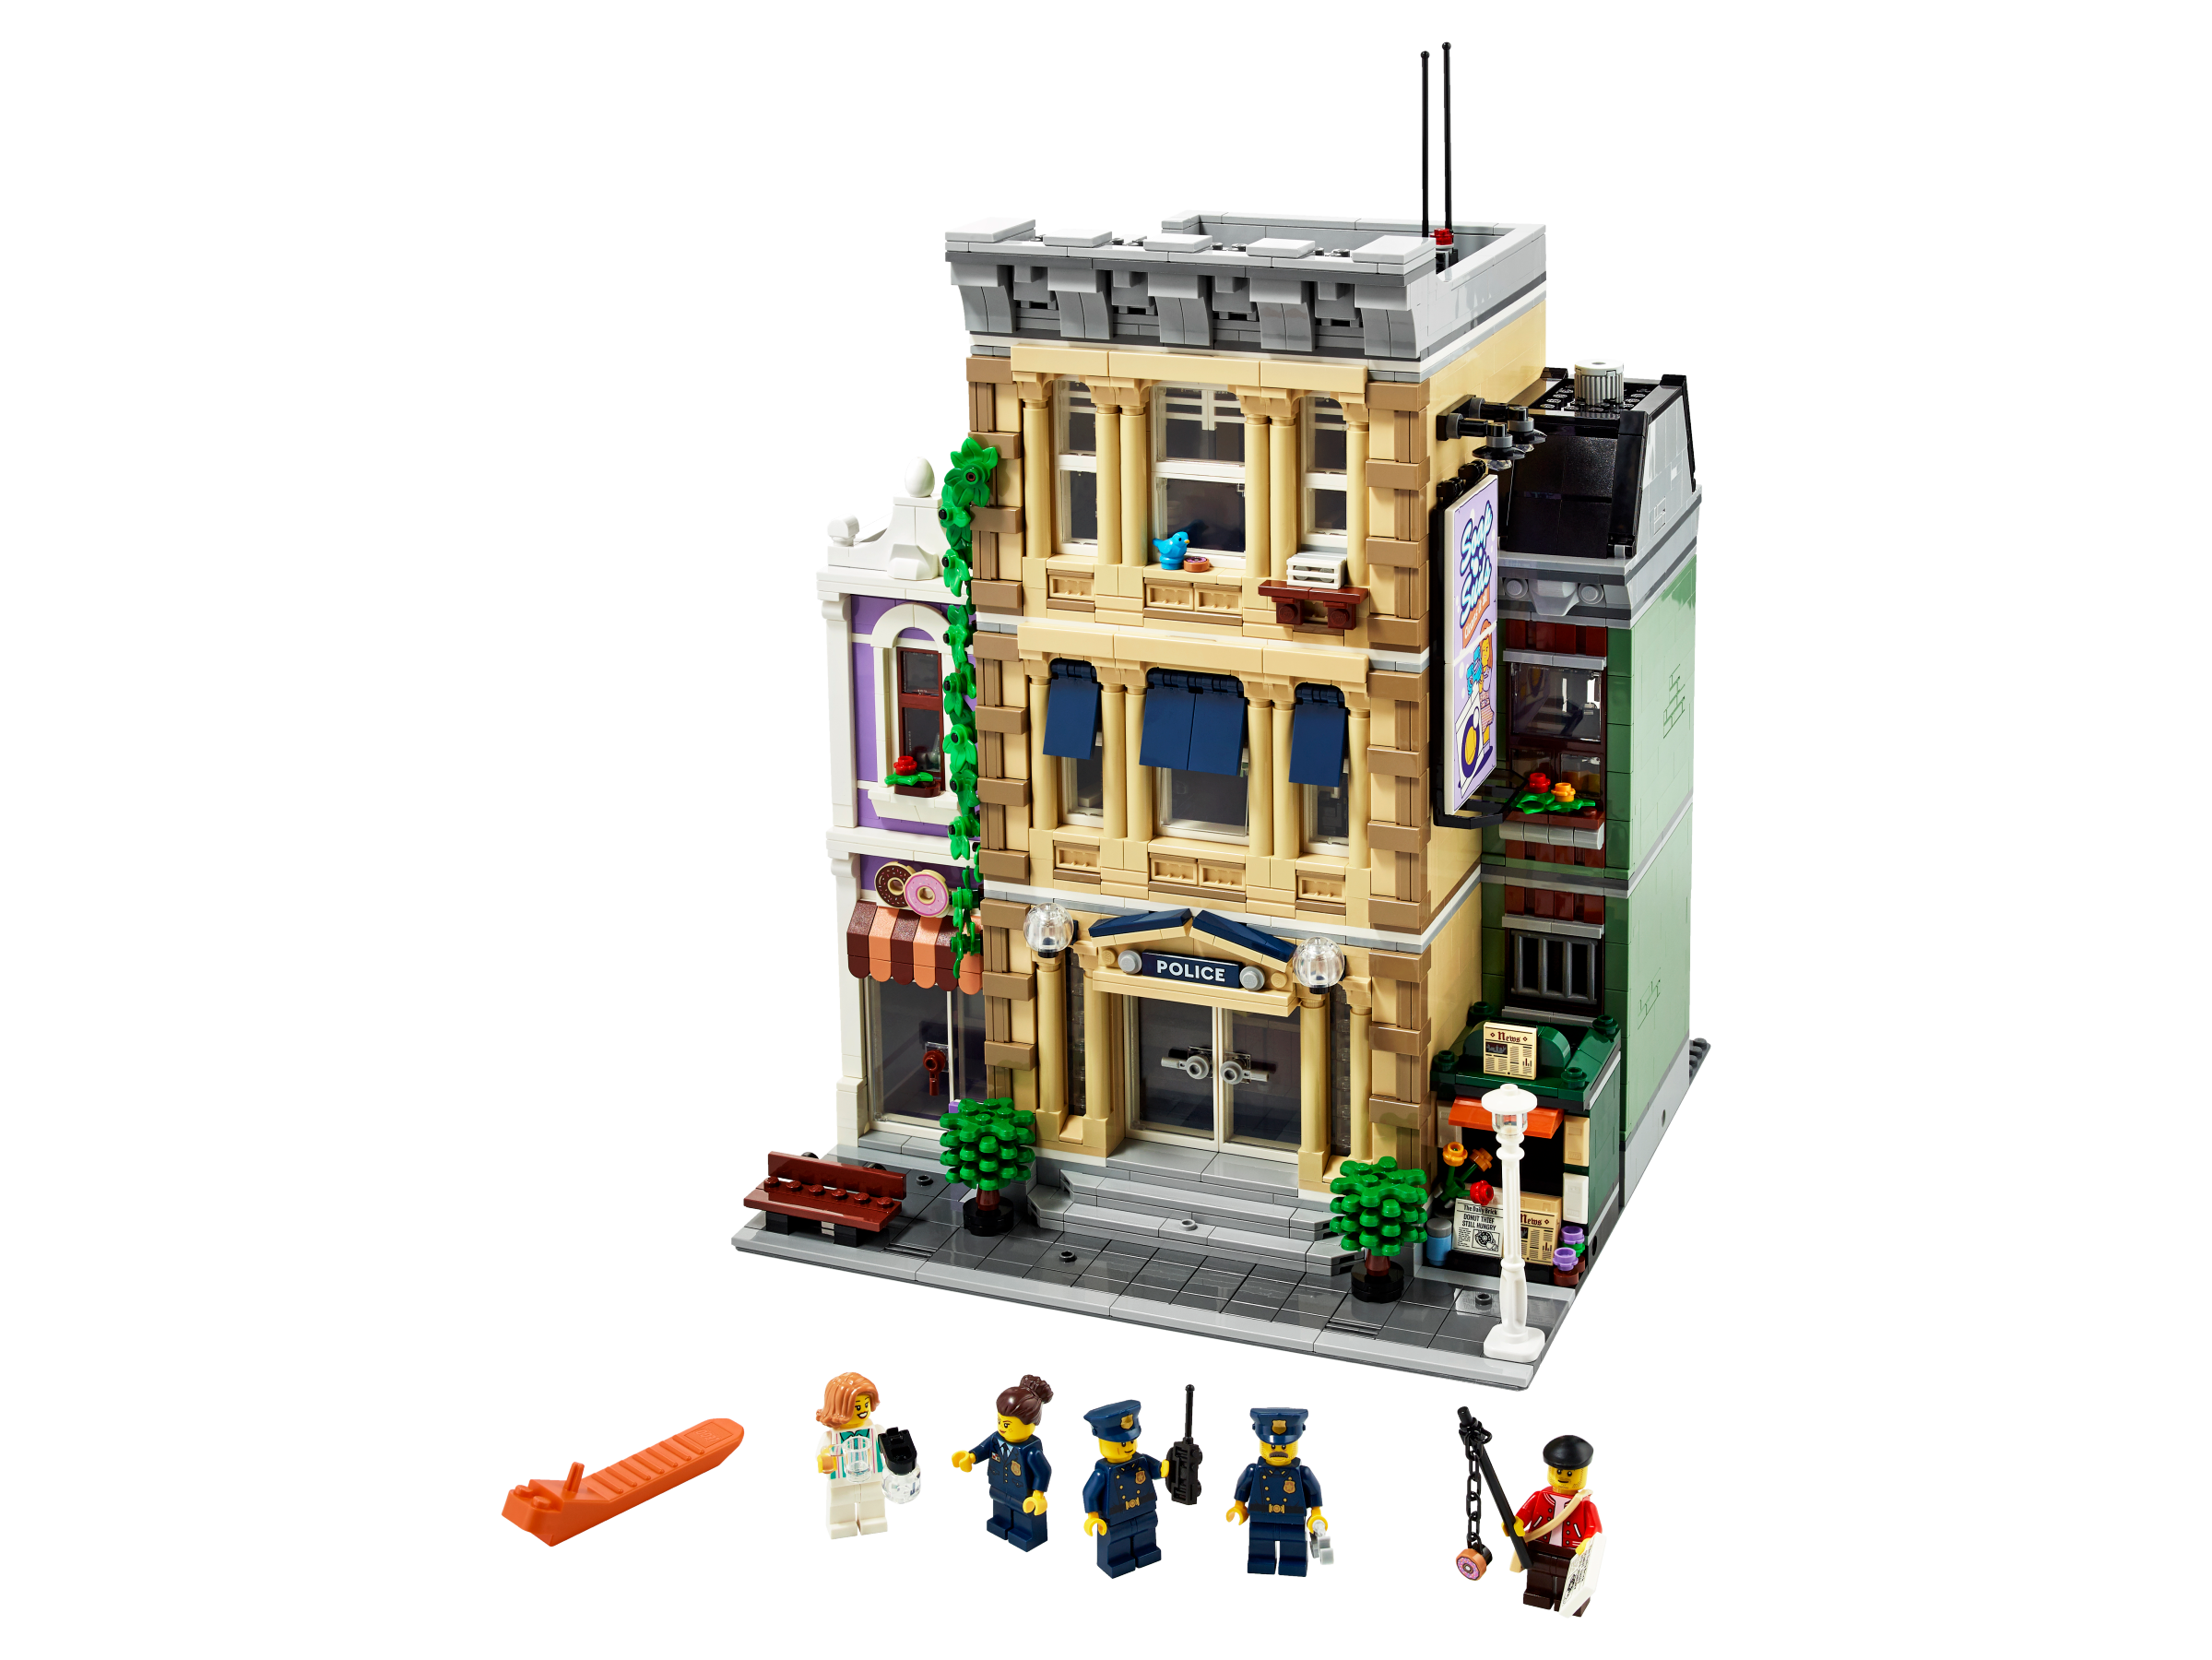 Police Station 60316 | City | Buy online at the Official LEGO® Shop US